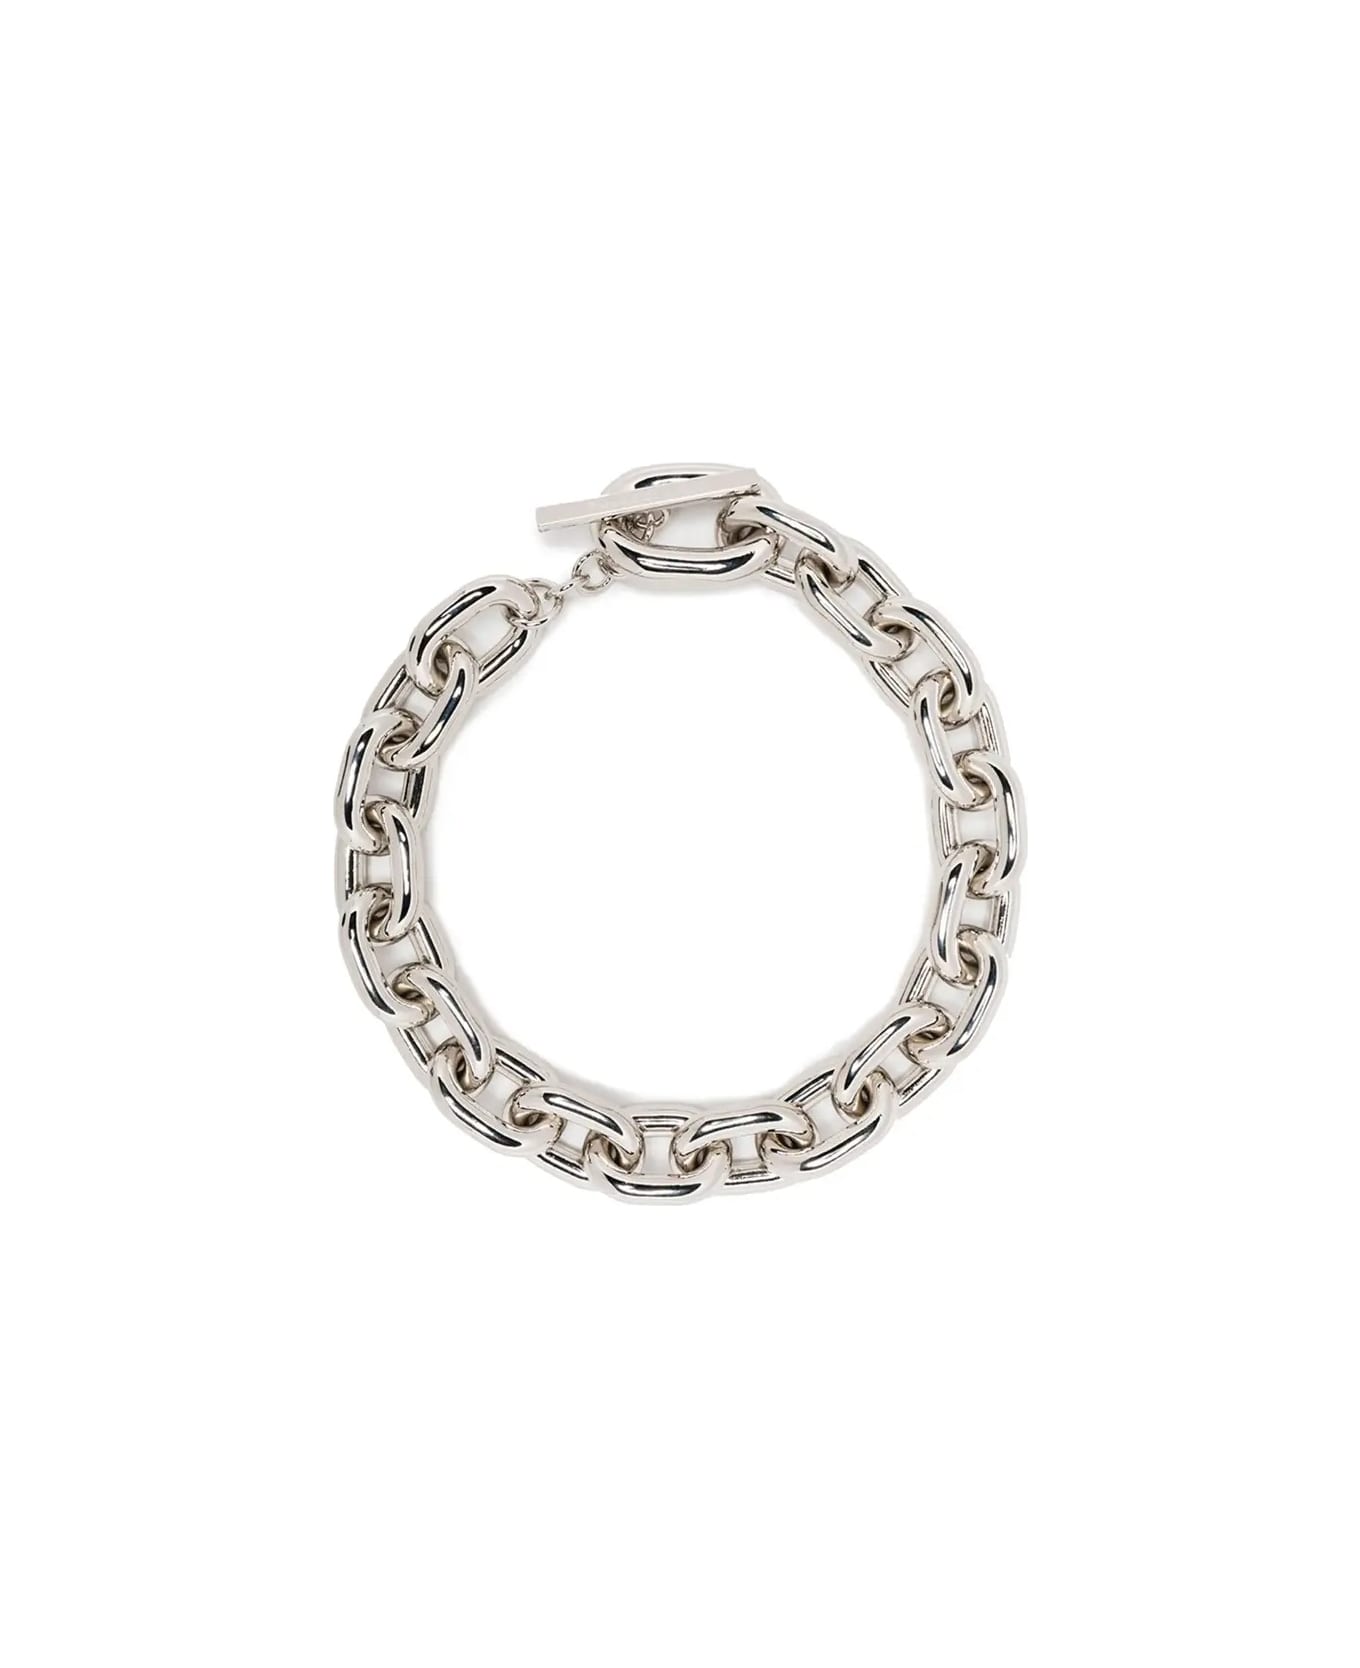 Paco Rabanne Xl Link Necklace In Silver - Silver